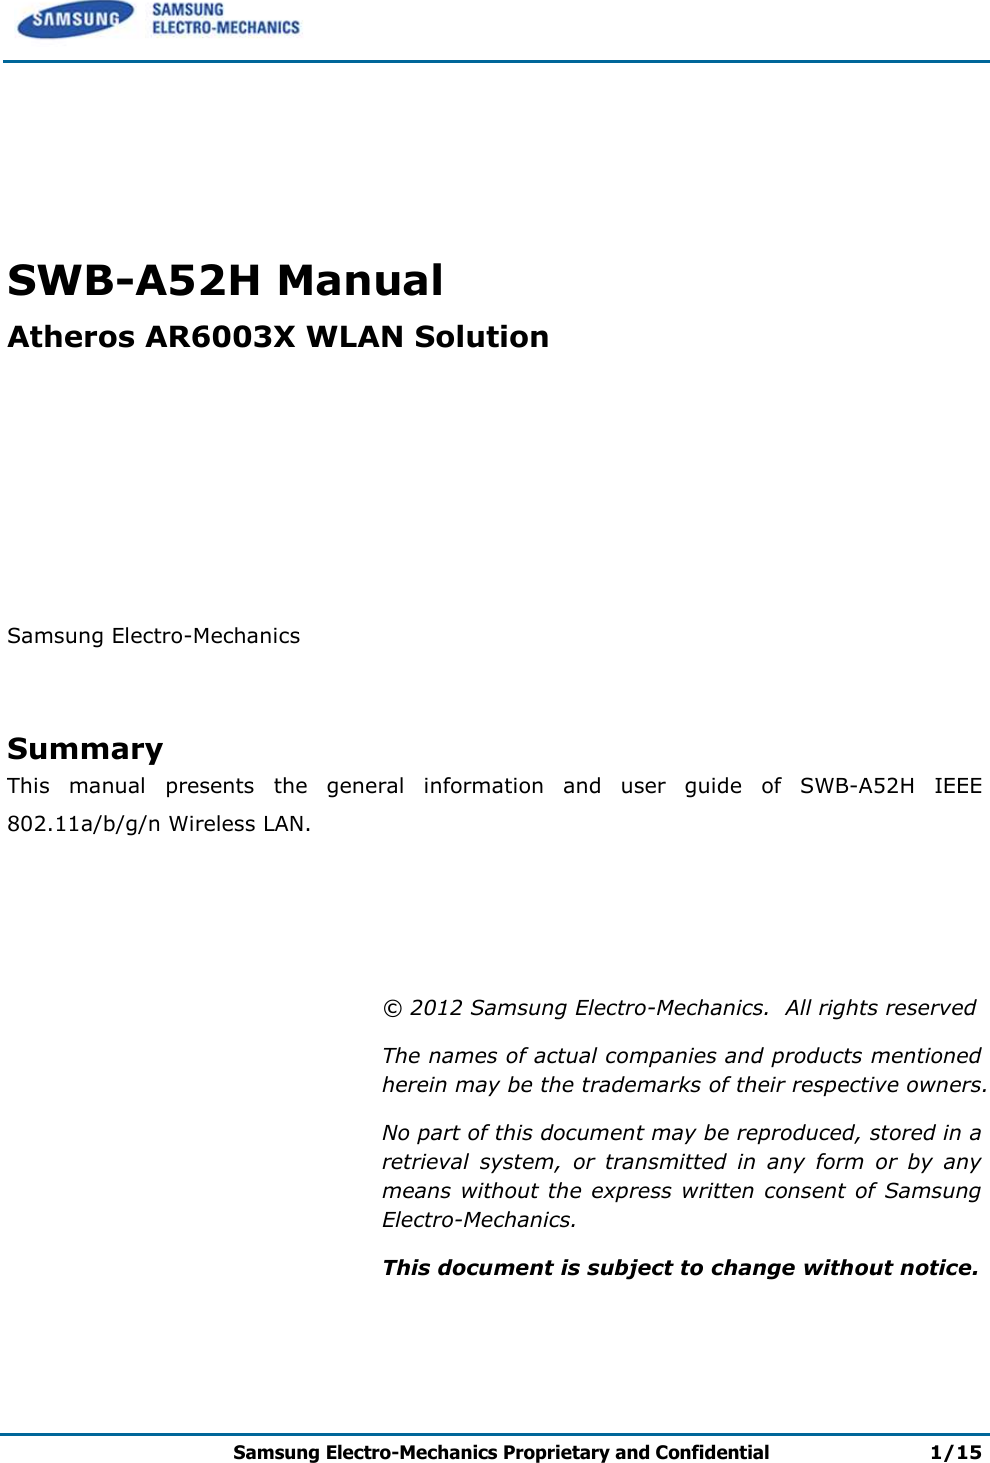      Samsung Electro-Mechanics Proprietary and Confidential 1/15     SWB-A52H Manual Atheros AR6003X WLAN Solution        Samsung Electro-Mechanics   Summary This  manual  presents  the  general  information  and  user  guide  of  SWB-A52H  IEEE 802.11a/b/g/n Wireless LAN.      © 2012 Samsung Electro-Mechanics.  All rights reserved The names of actual companies and products mentioned herein may be the trademarks of their respective owners. No part of this document may be reproduced, stored in a retrieval  system,  or  transmitted  in  any  form  or  by  any means without the  express written consent of  Samsung Electro-Mechanics. This document is subject to change without notice.   